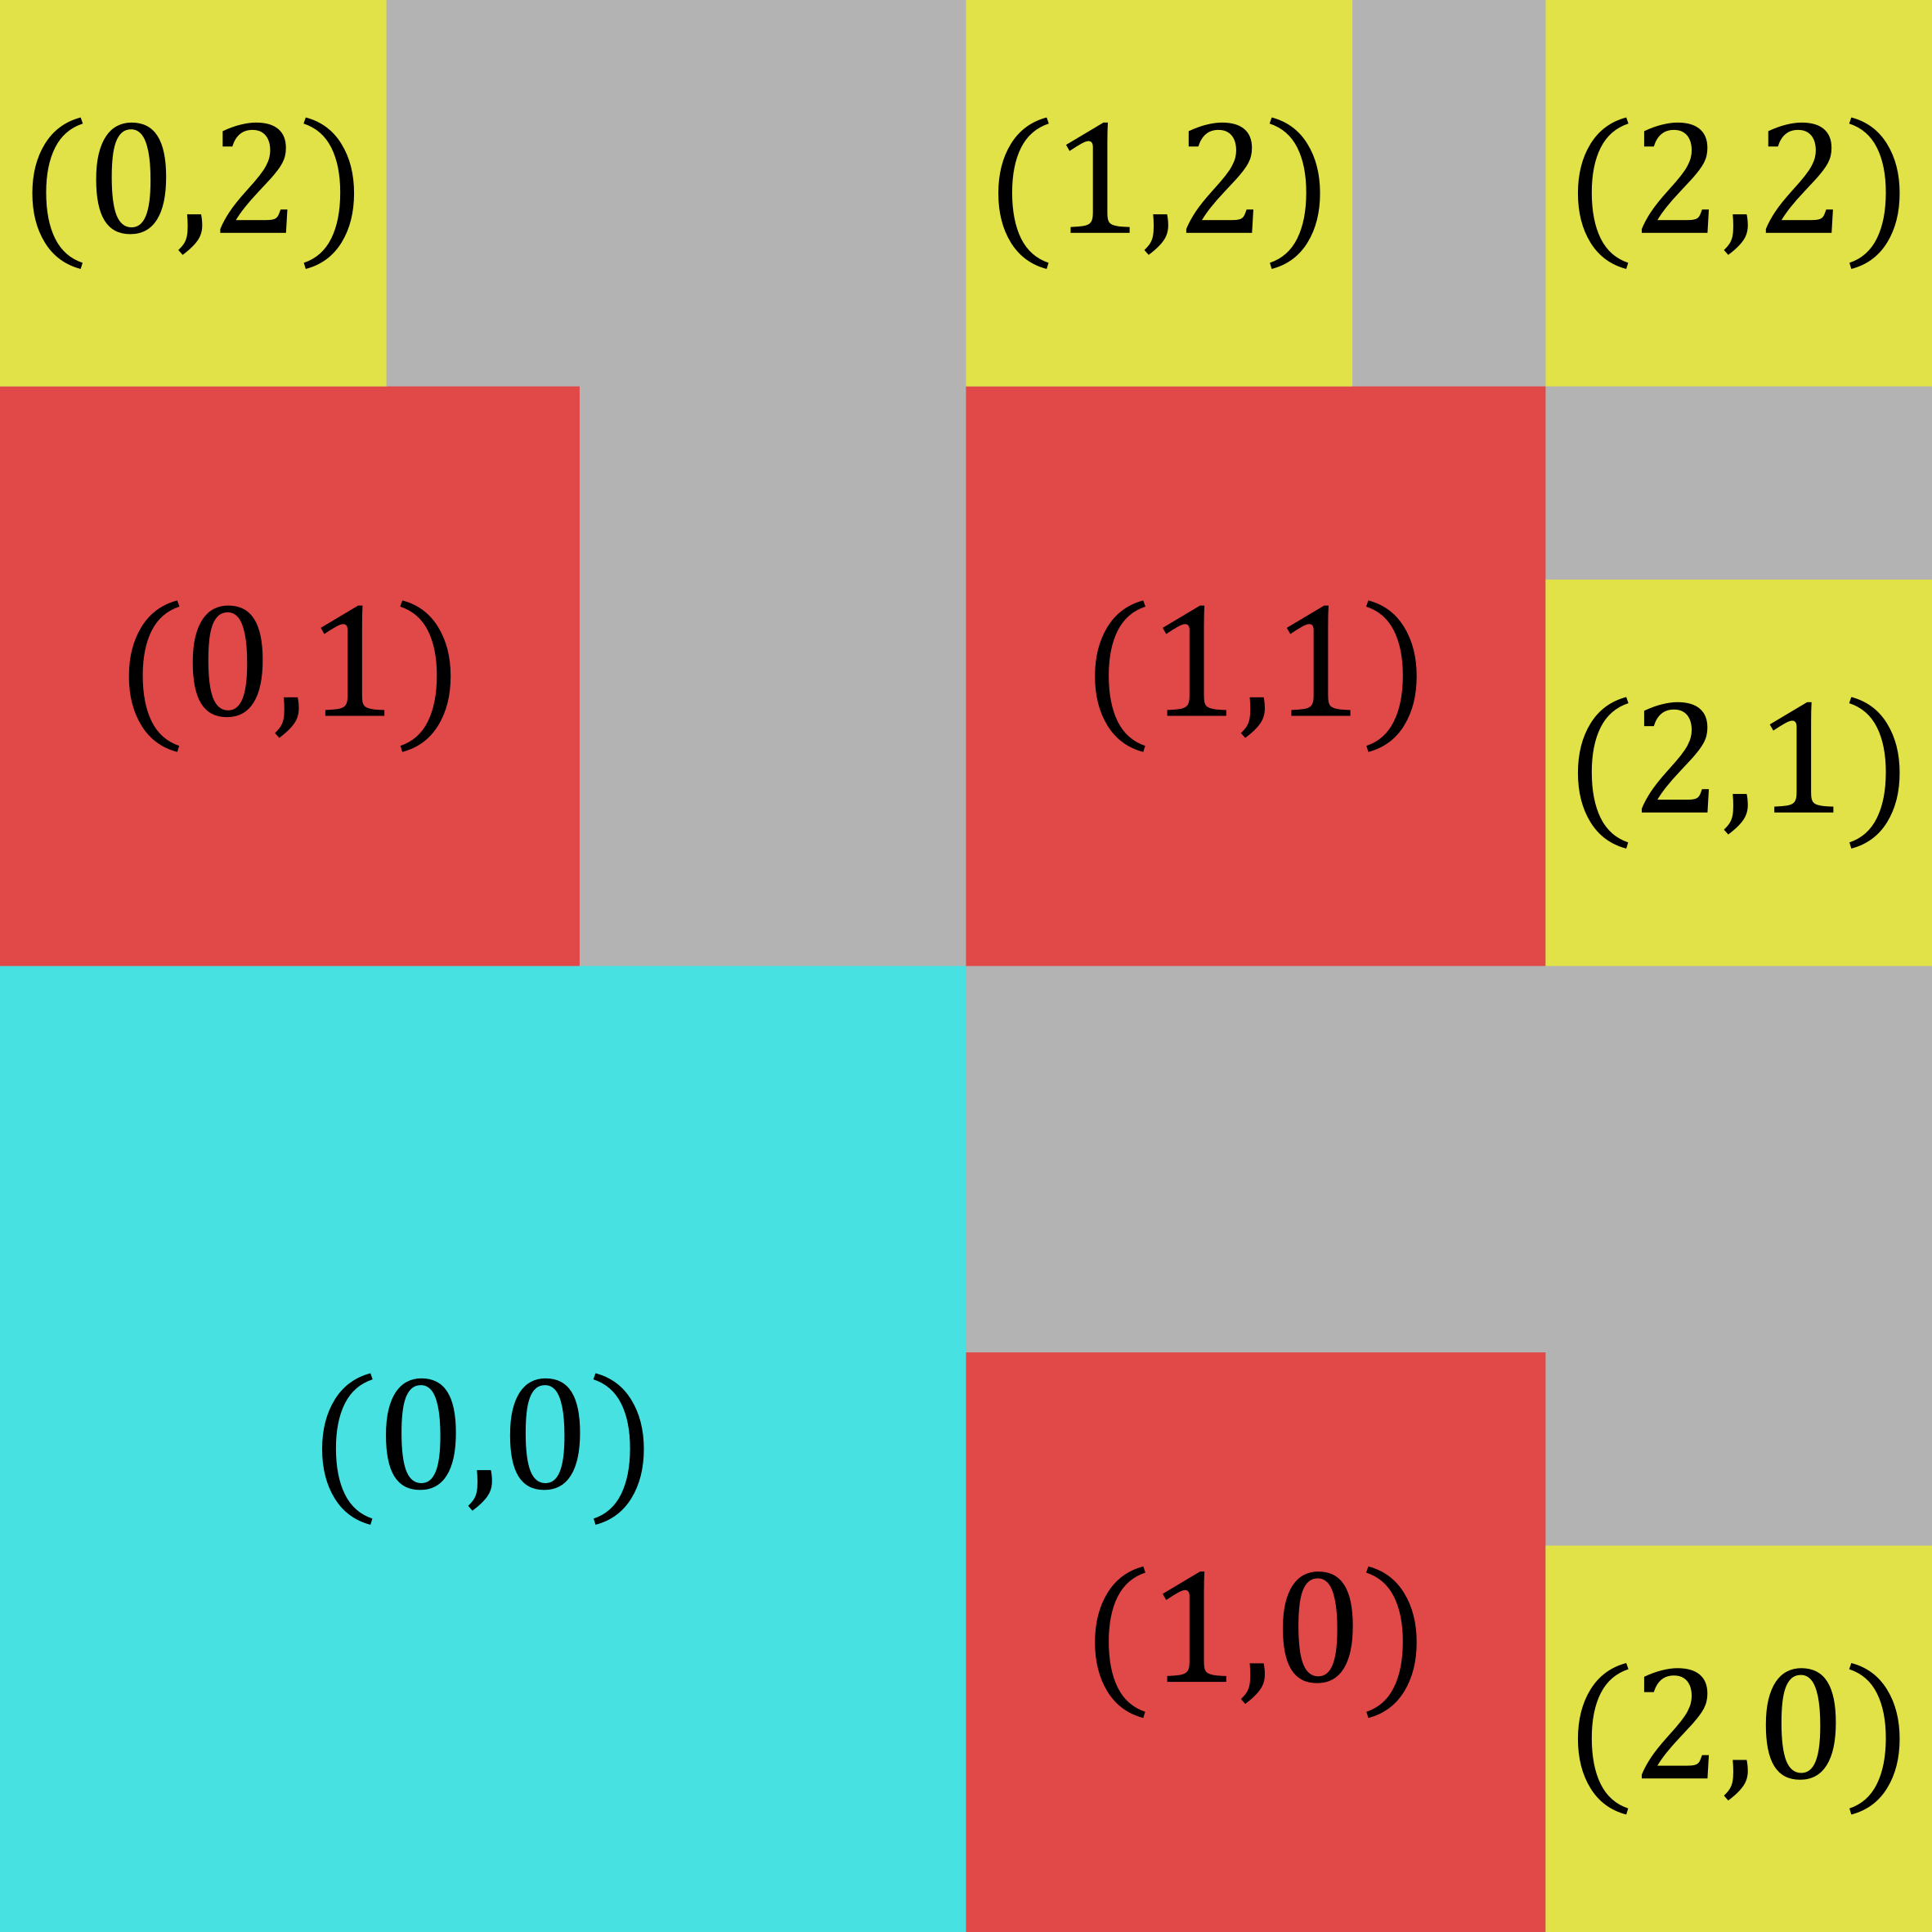 A grid of 9 squares of 3 different side lengths